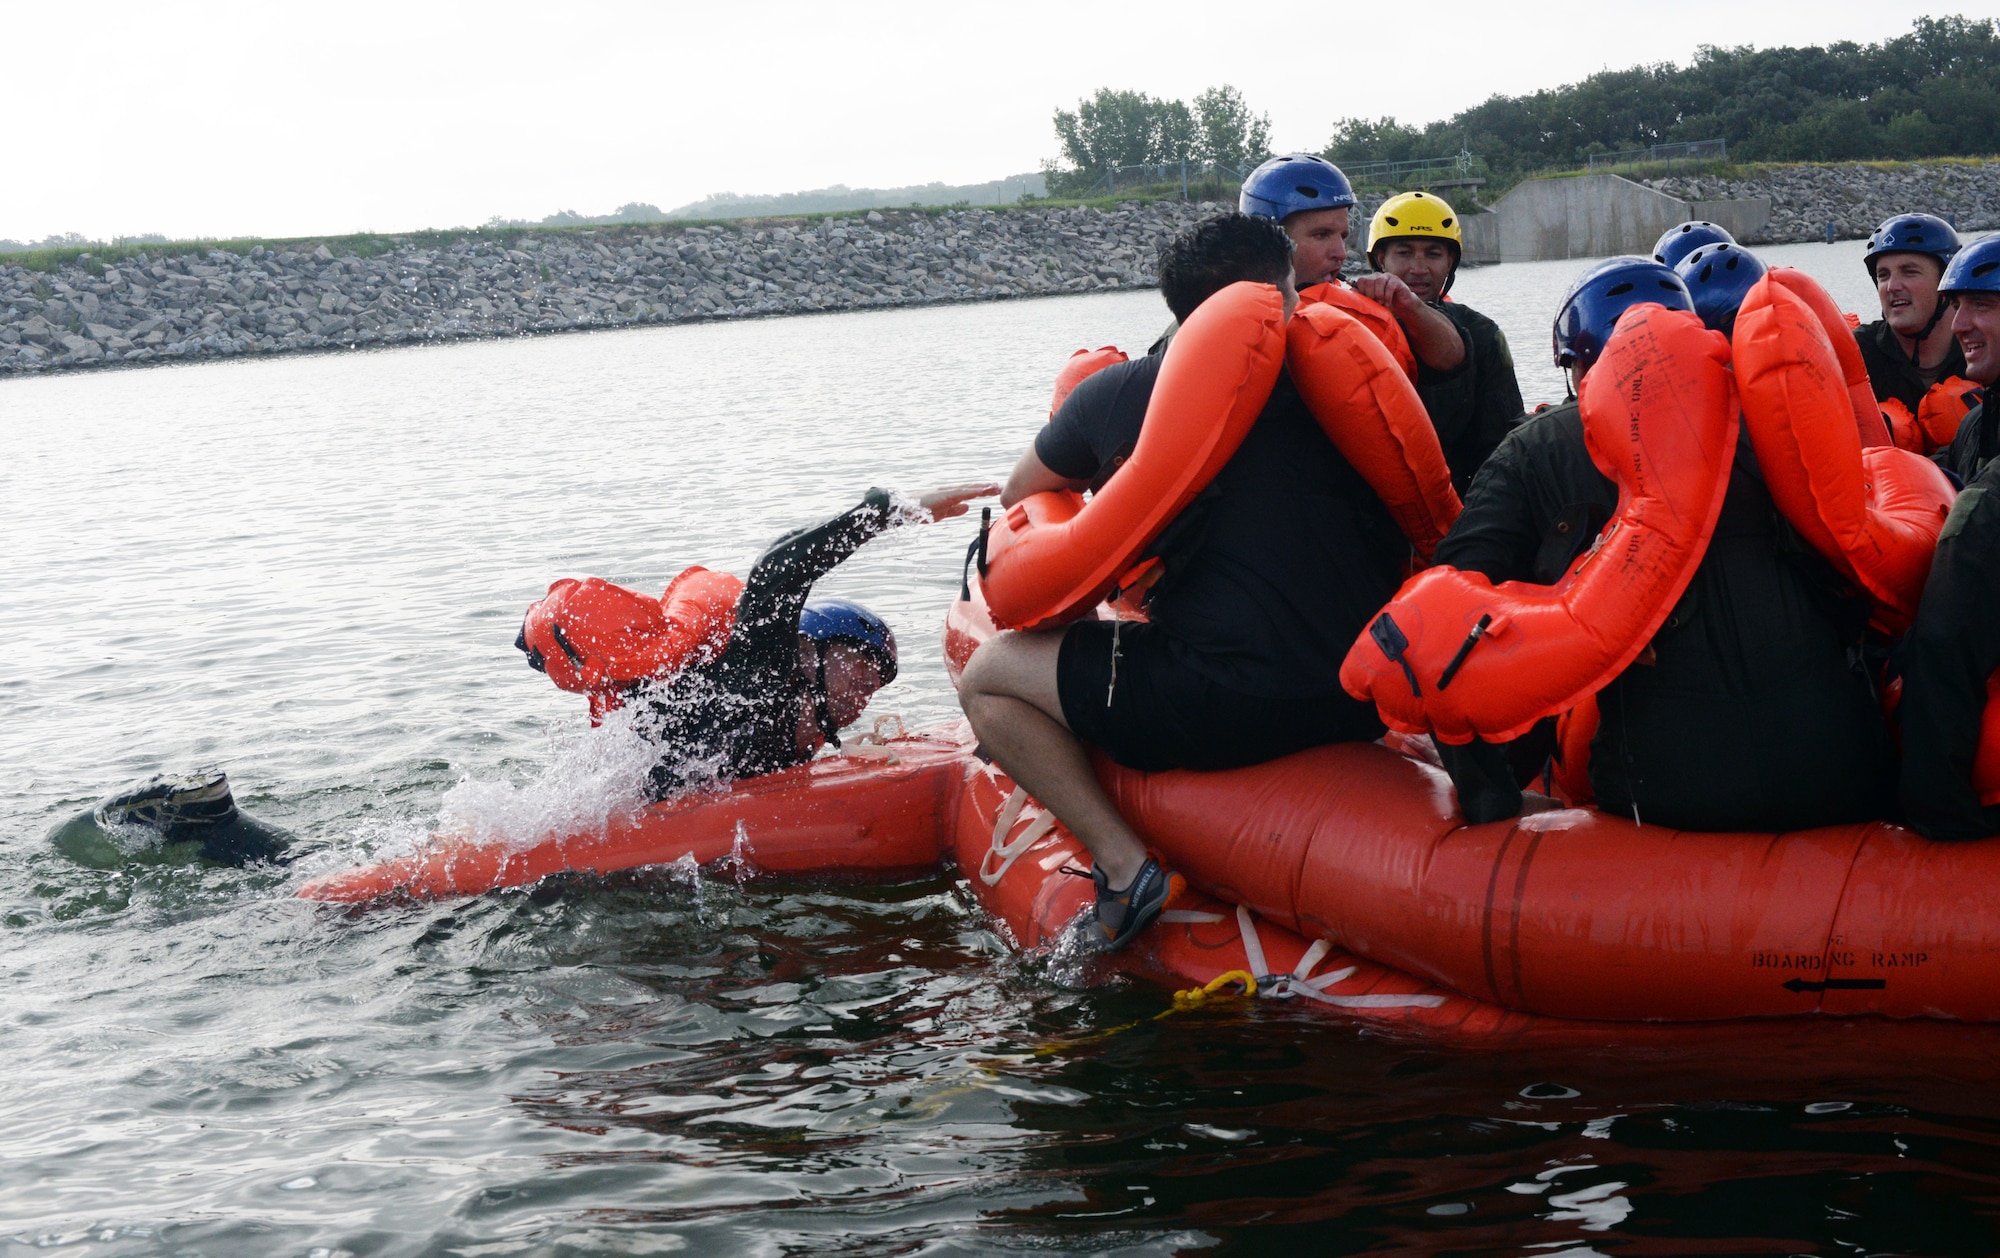 A 170th Group Citizen Airman, assigned to Offutt Air Force Base, Nebraska, hoists himseld out of the water and onto a raft while participating in water survival and rescue training July 14, 2018. The aircrew members were briefed on the availability and use of tools contained in their survival gear before putting academics and theory to the test in the waters of a local lake.